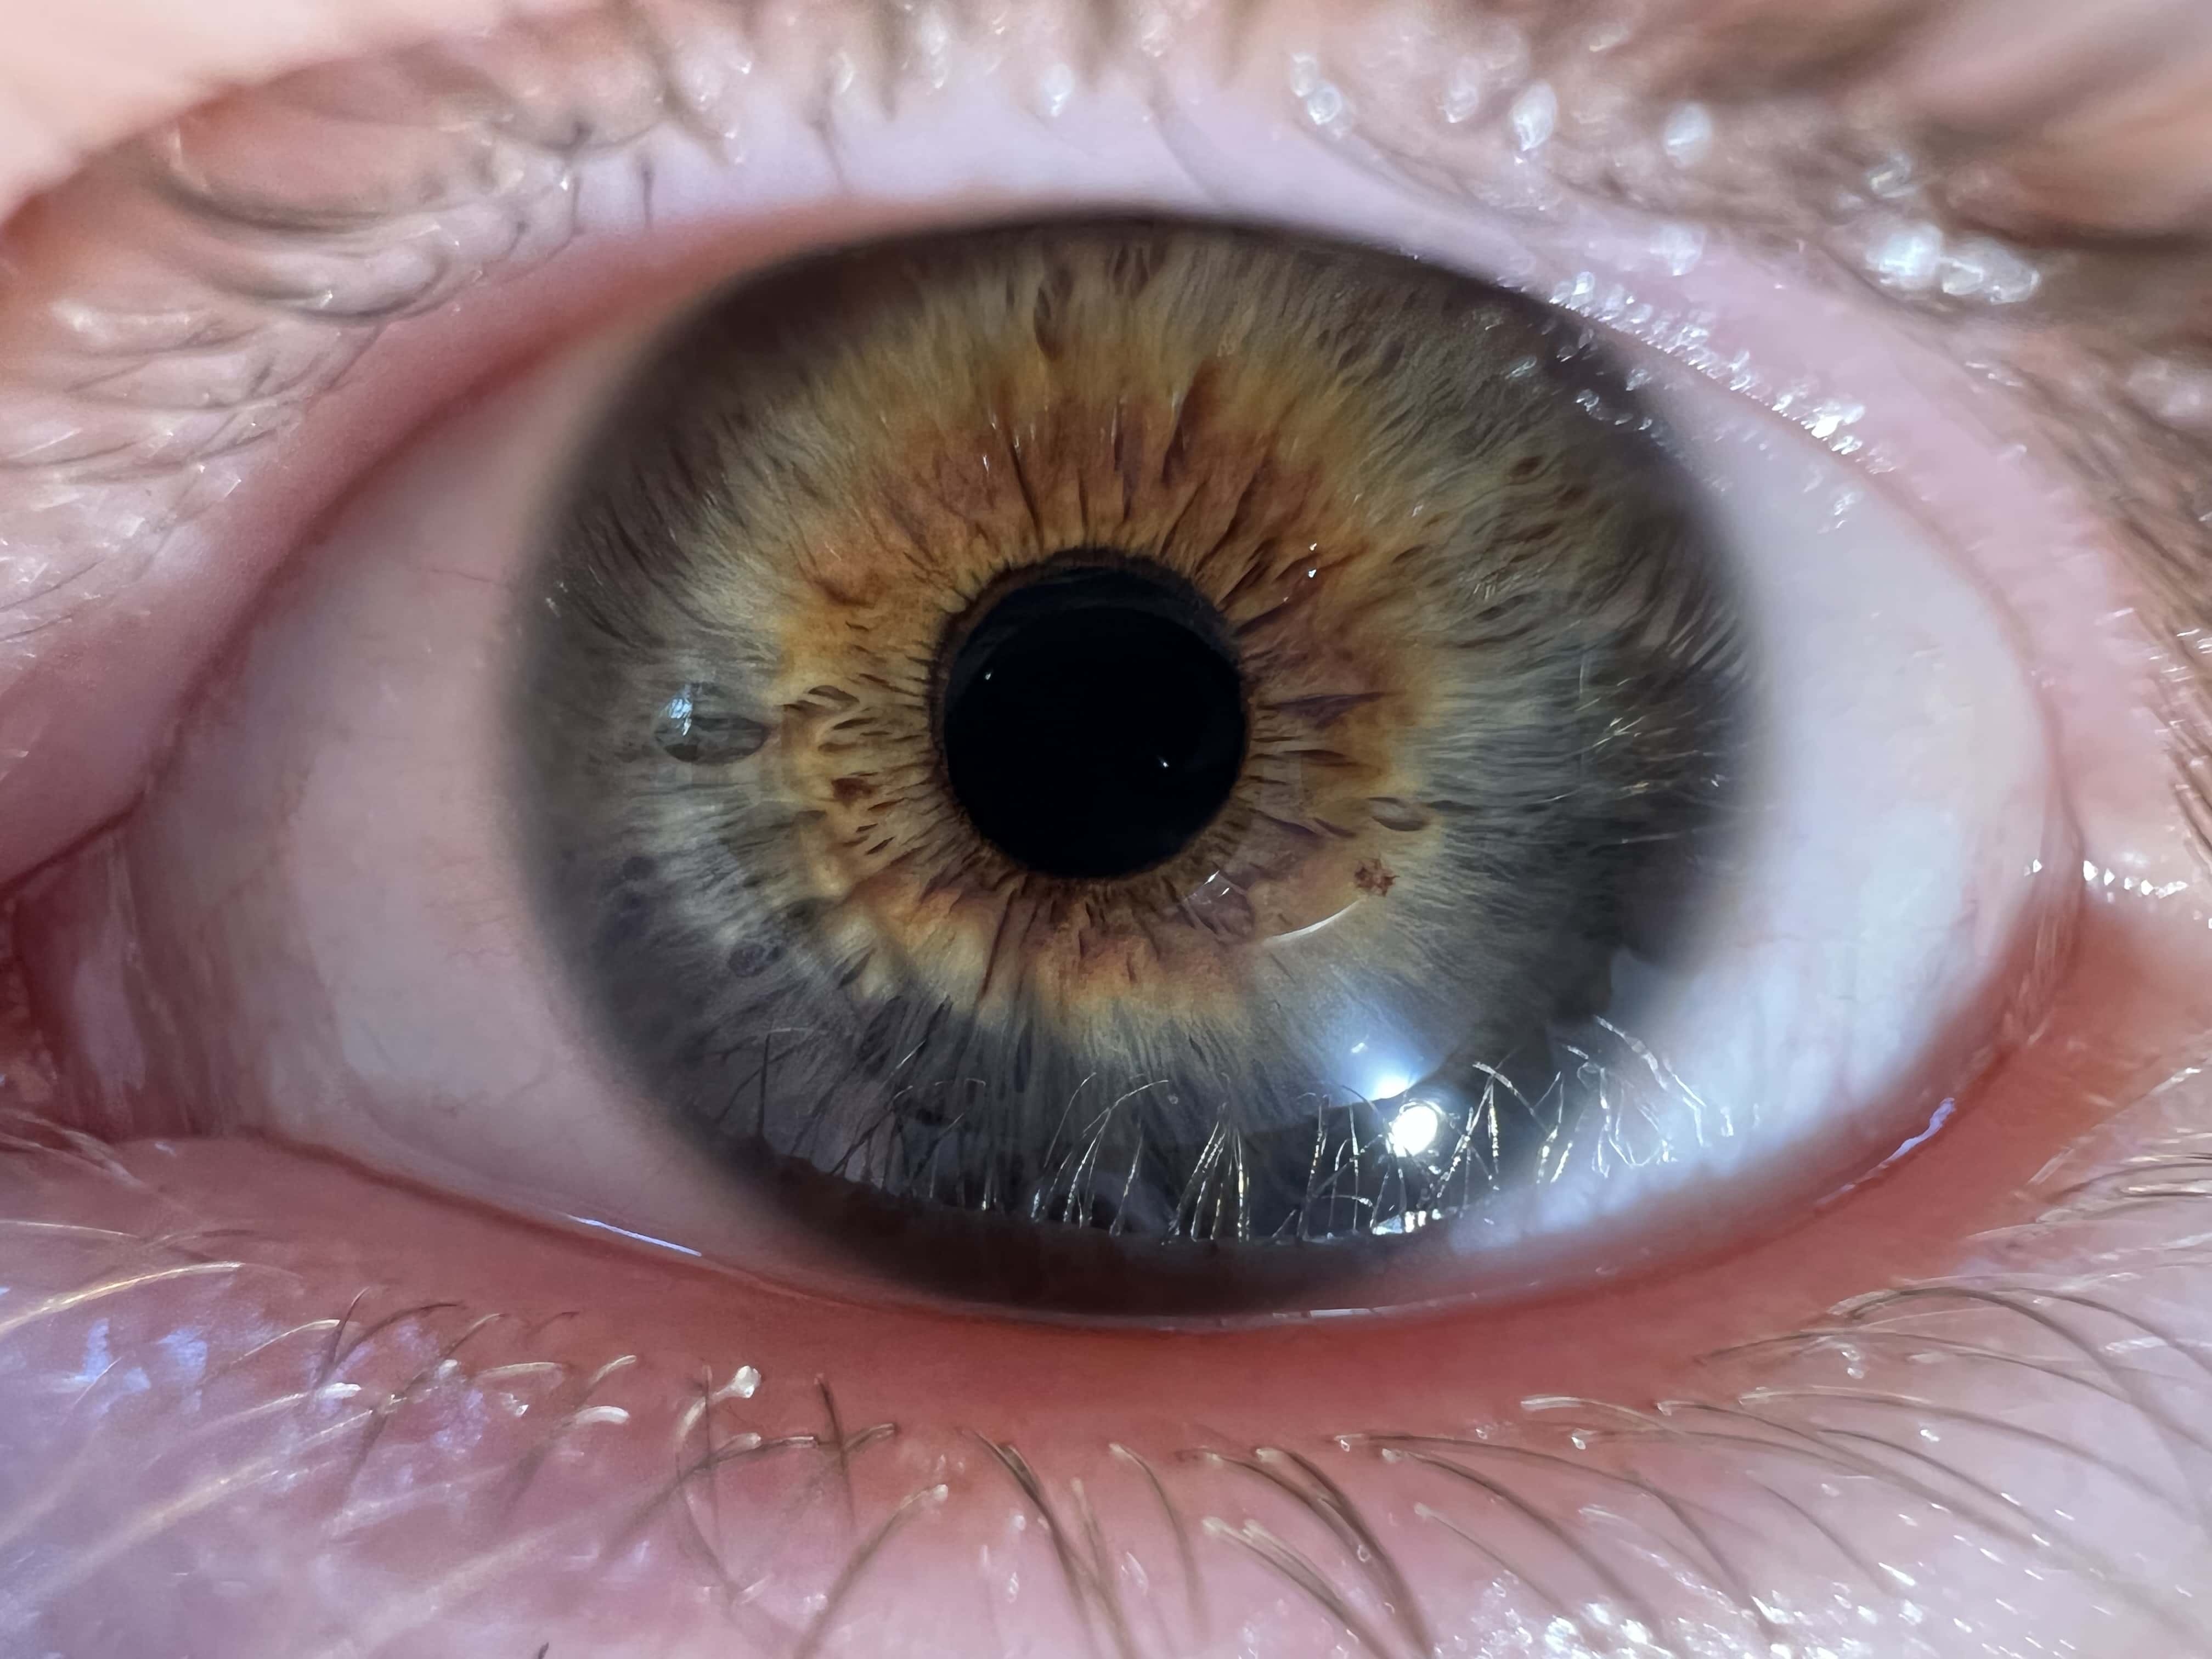 Macro test shot of eyeball from iPhone 13 Pro. Look at that detail in the iris!